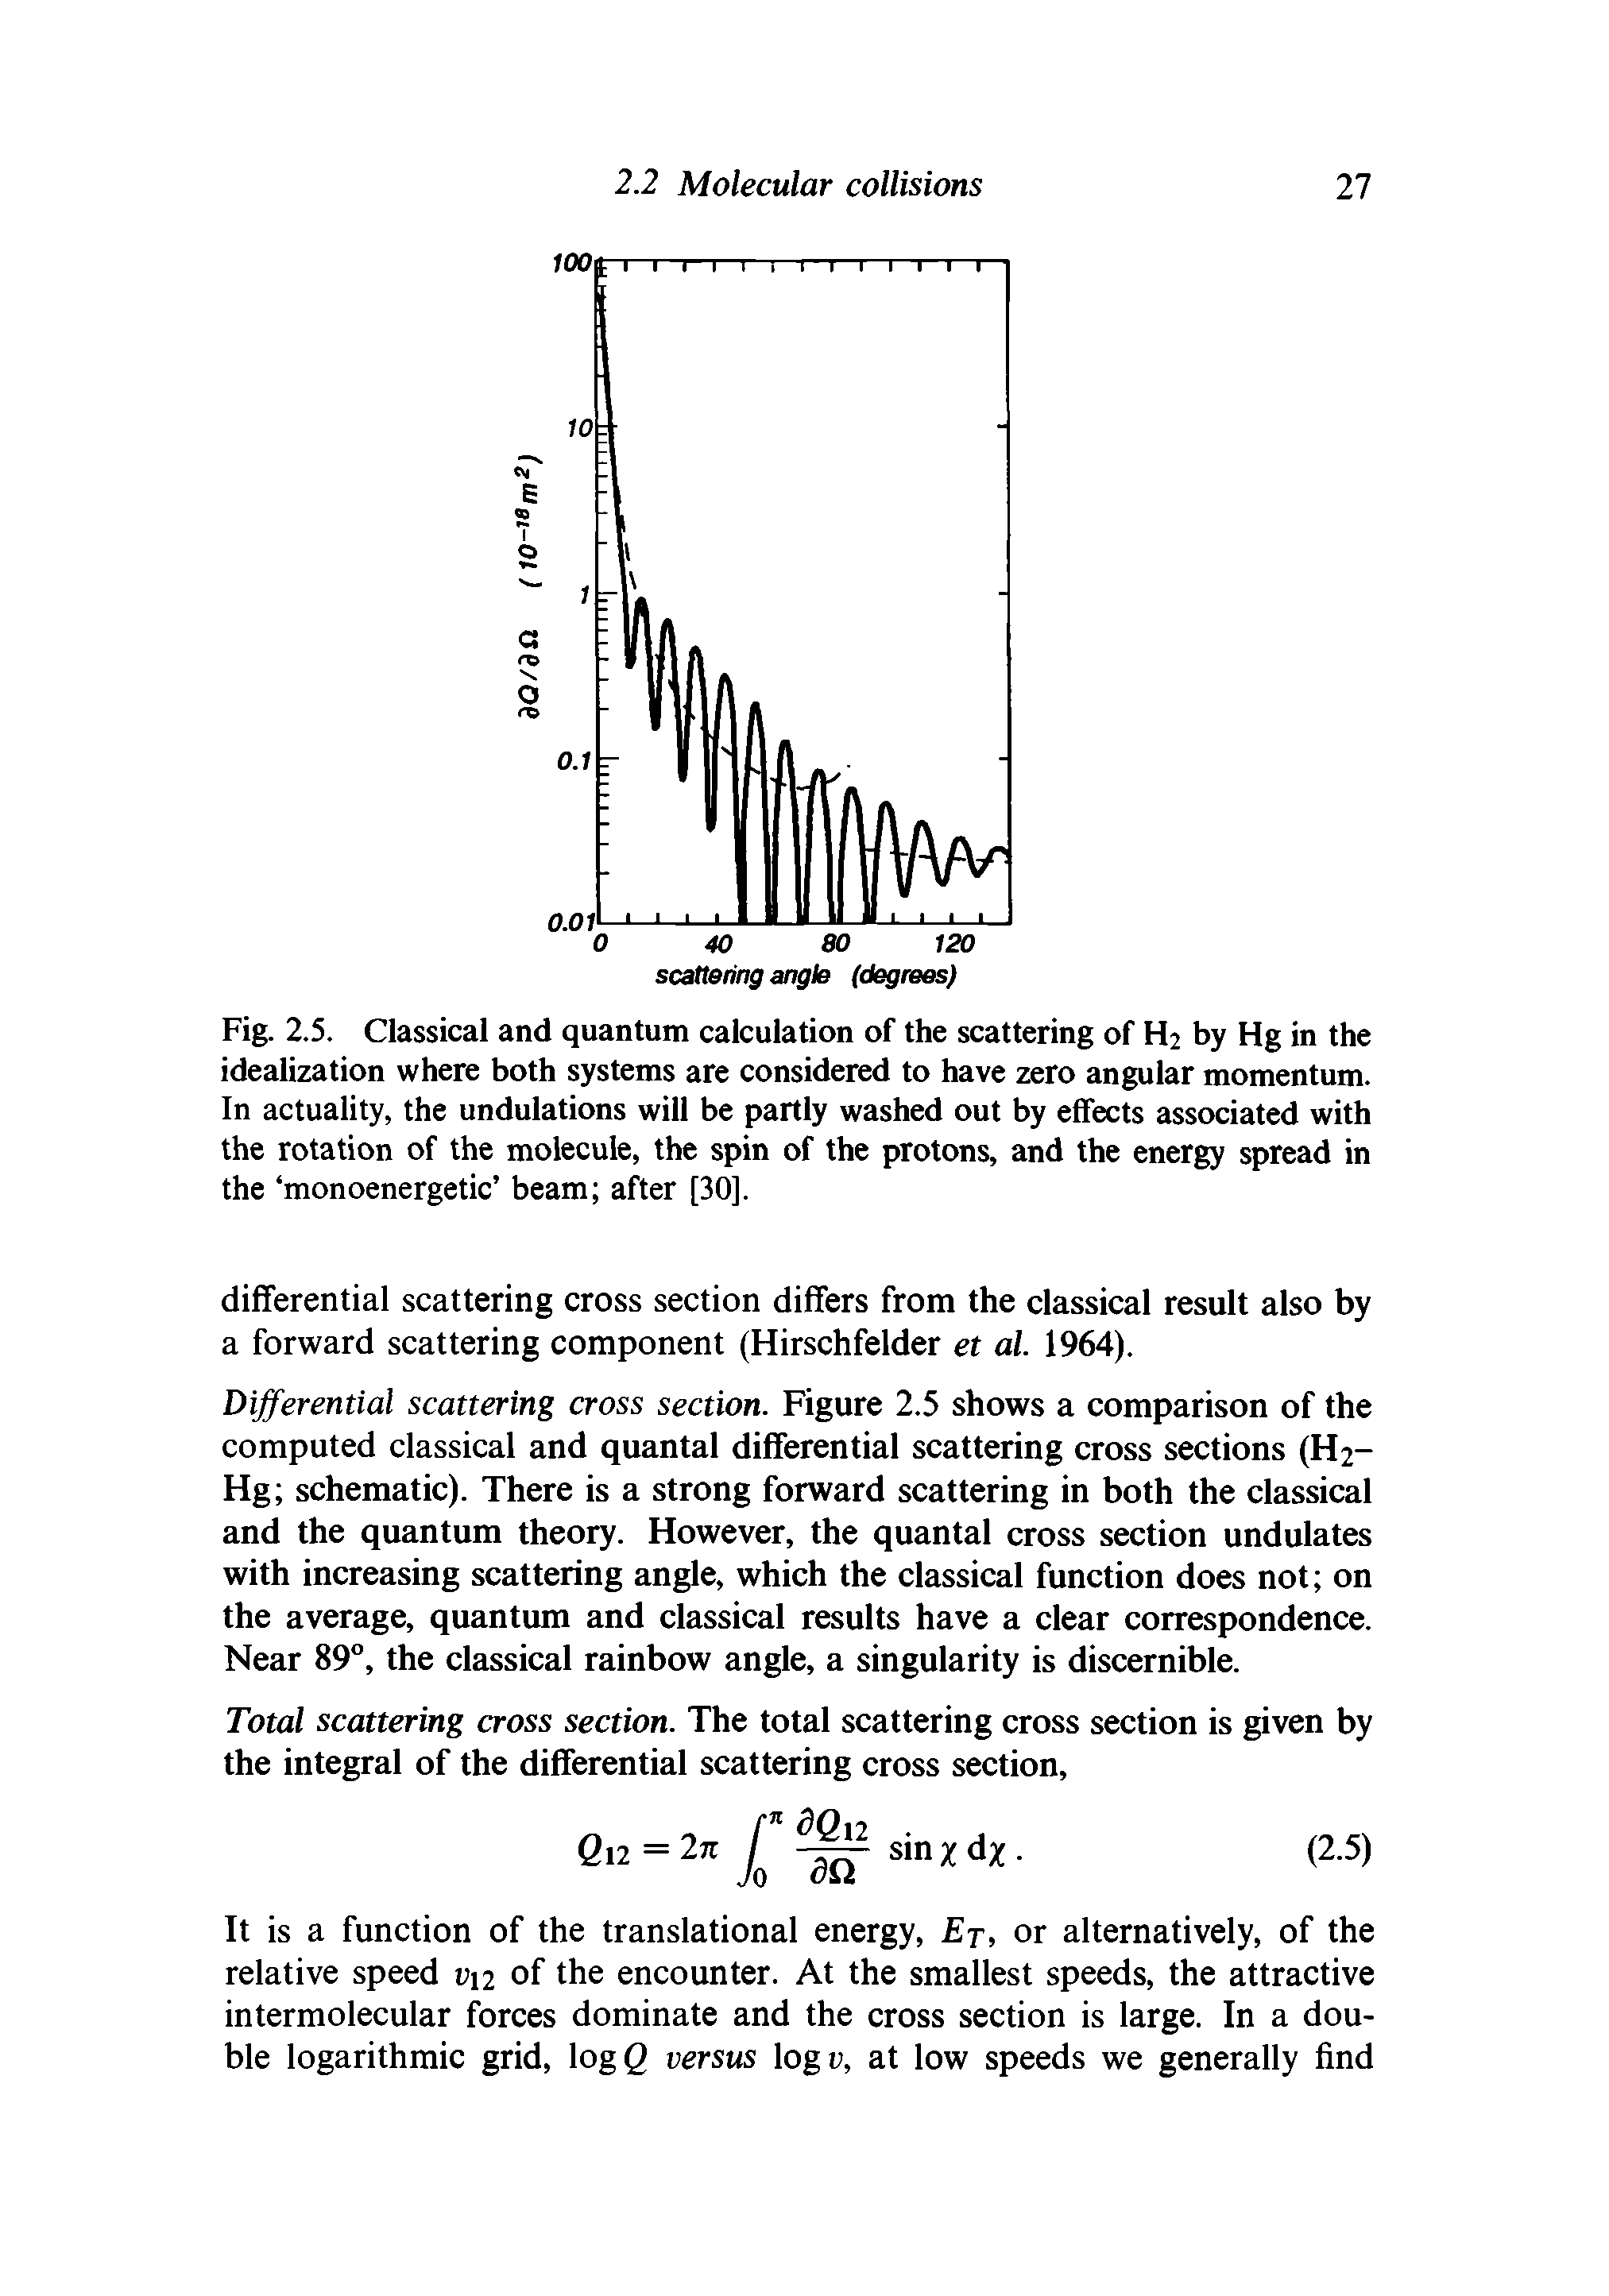 Fig. 2.5. Classical and quantum calculation of the scattering of H2 by Hg in the idealization where both systems are considered to have zero angular momentum. In actuality, the undulations will be partly washed out by effects associated with the rotation of the molecule, the spin of the protons, and the energy spread in the monoenergetic beam after [30],...